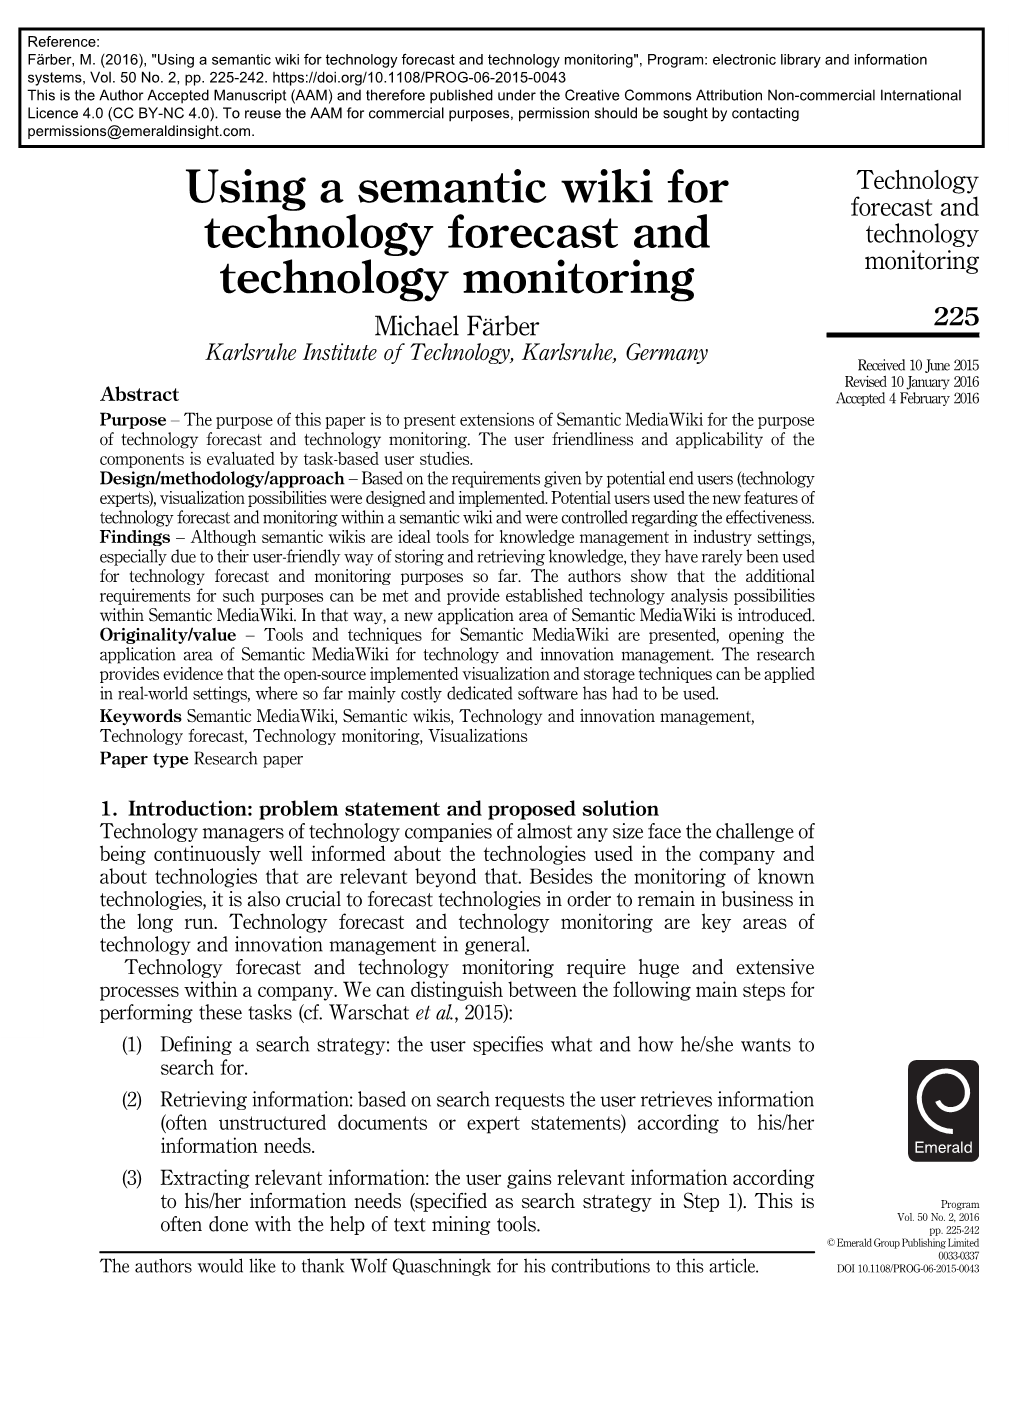 Using a Semantic Wiki for Technology Forecast and Technology Monitoring", Program: Electronic Library and Information Systems, Vol